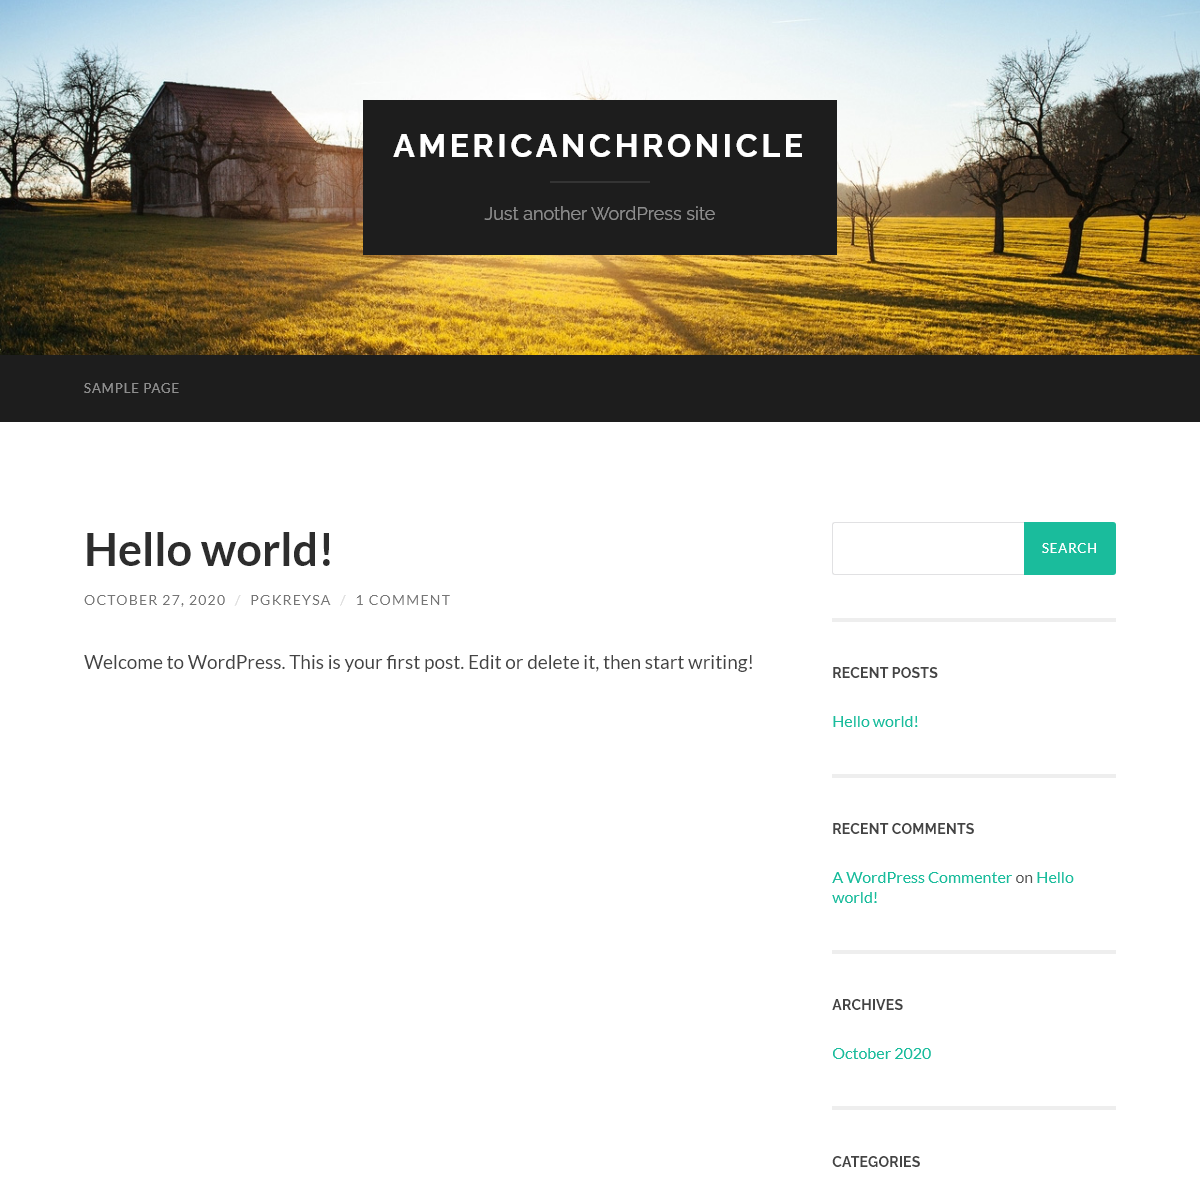 A complete backup of americanchronicle.com